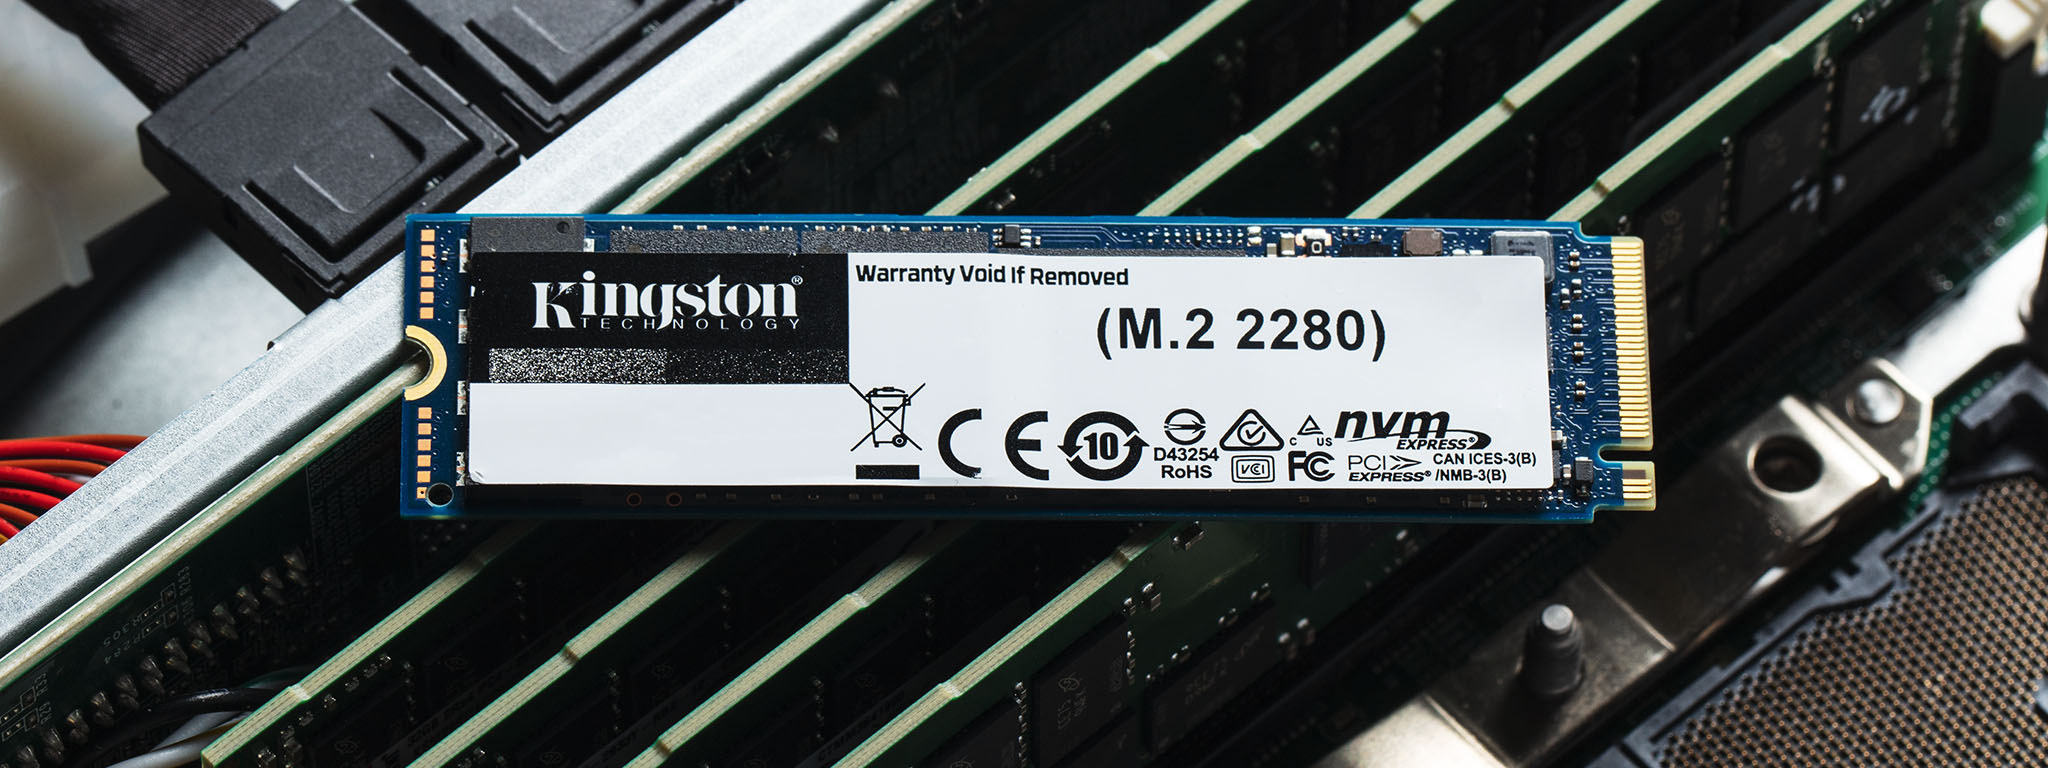 Should I Make the Switch to NVMe?